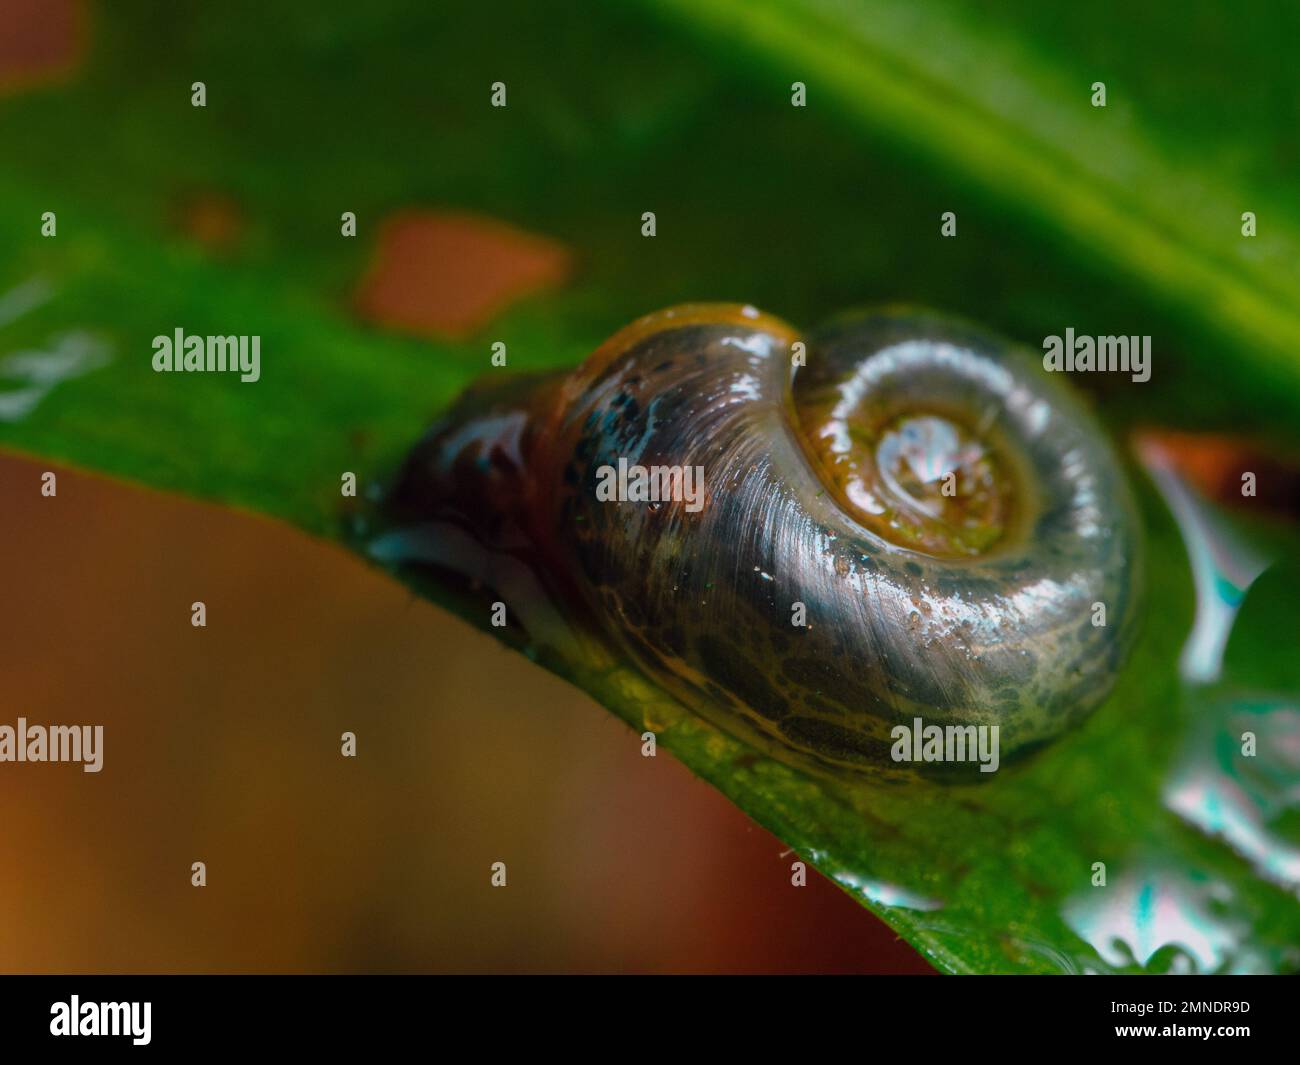 A freshwater snail known as biomphalaria, a disease vector of parasitic worms that causes schistosomiasis (esquistossomose) Stock Photo